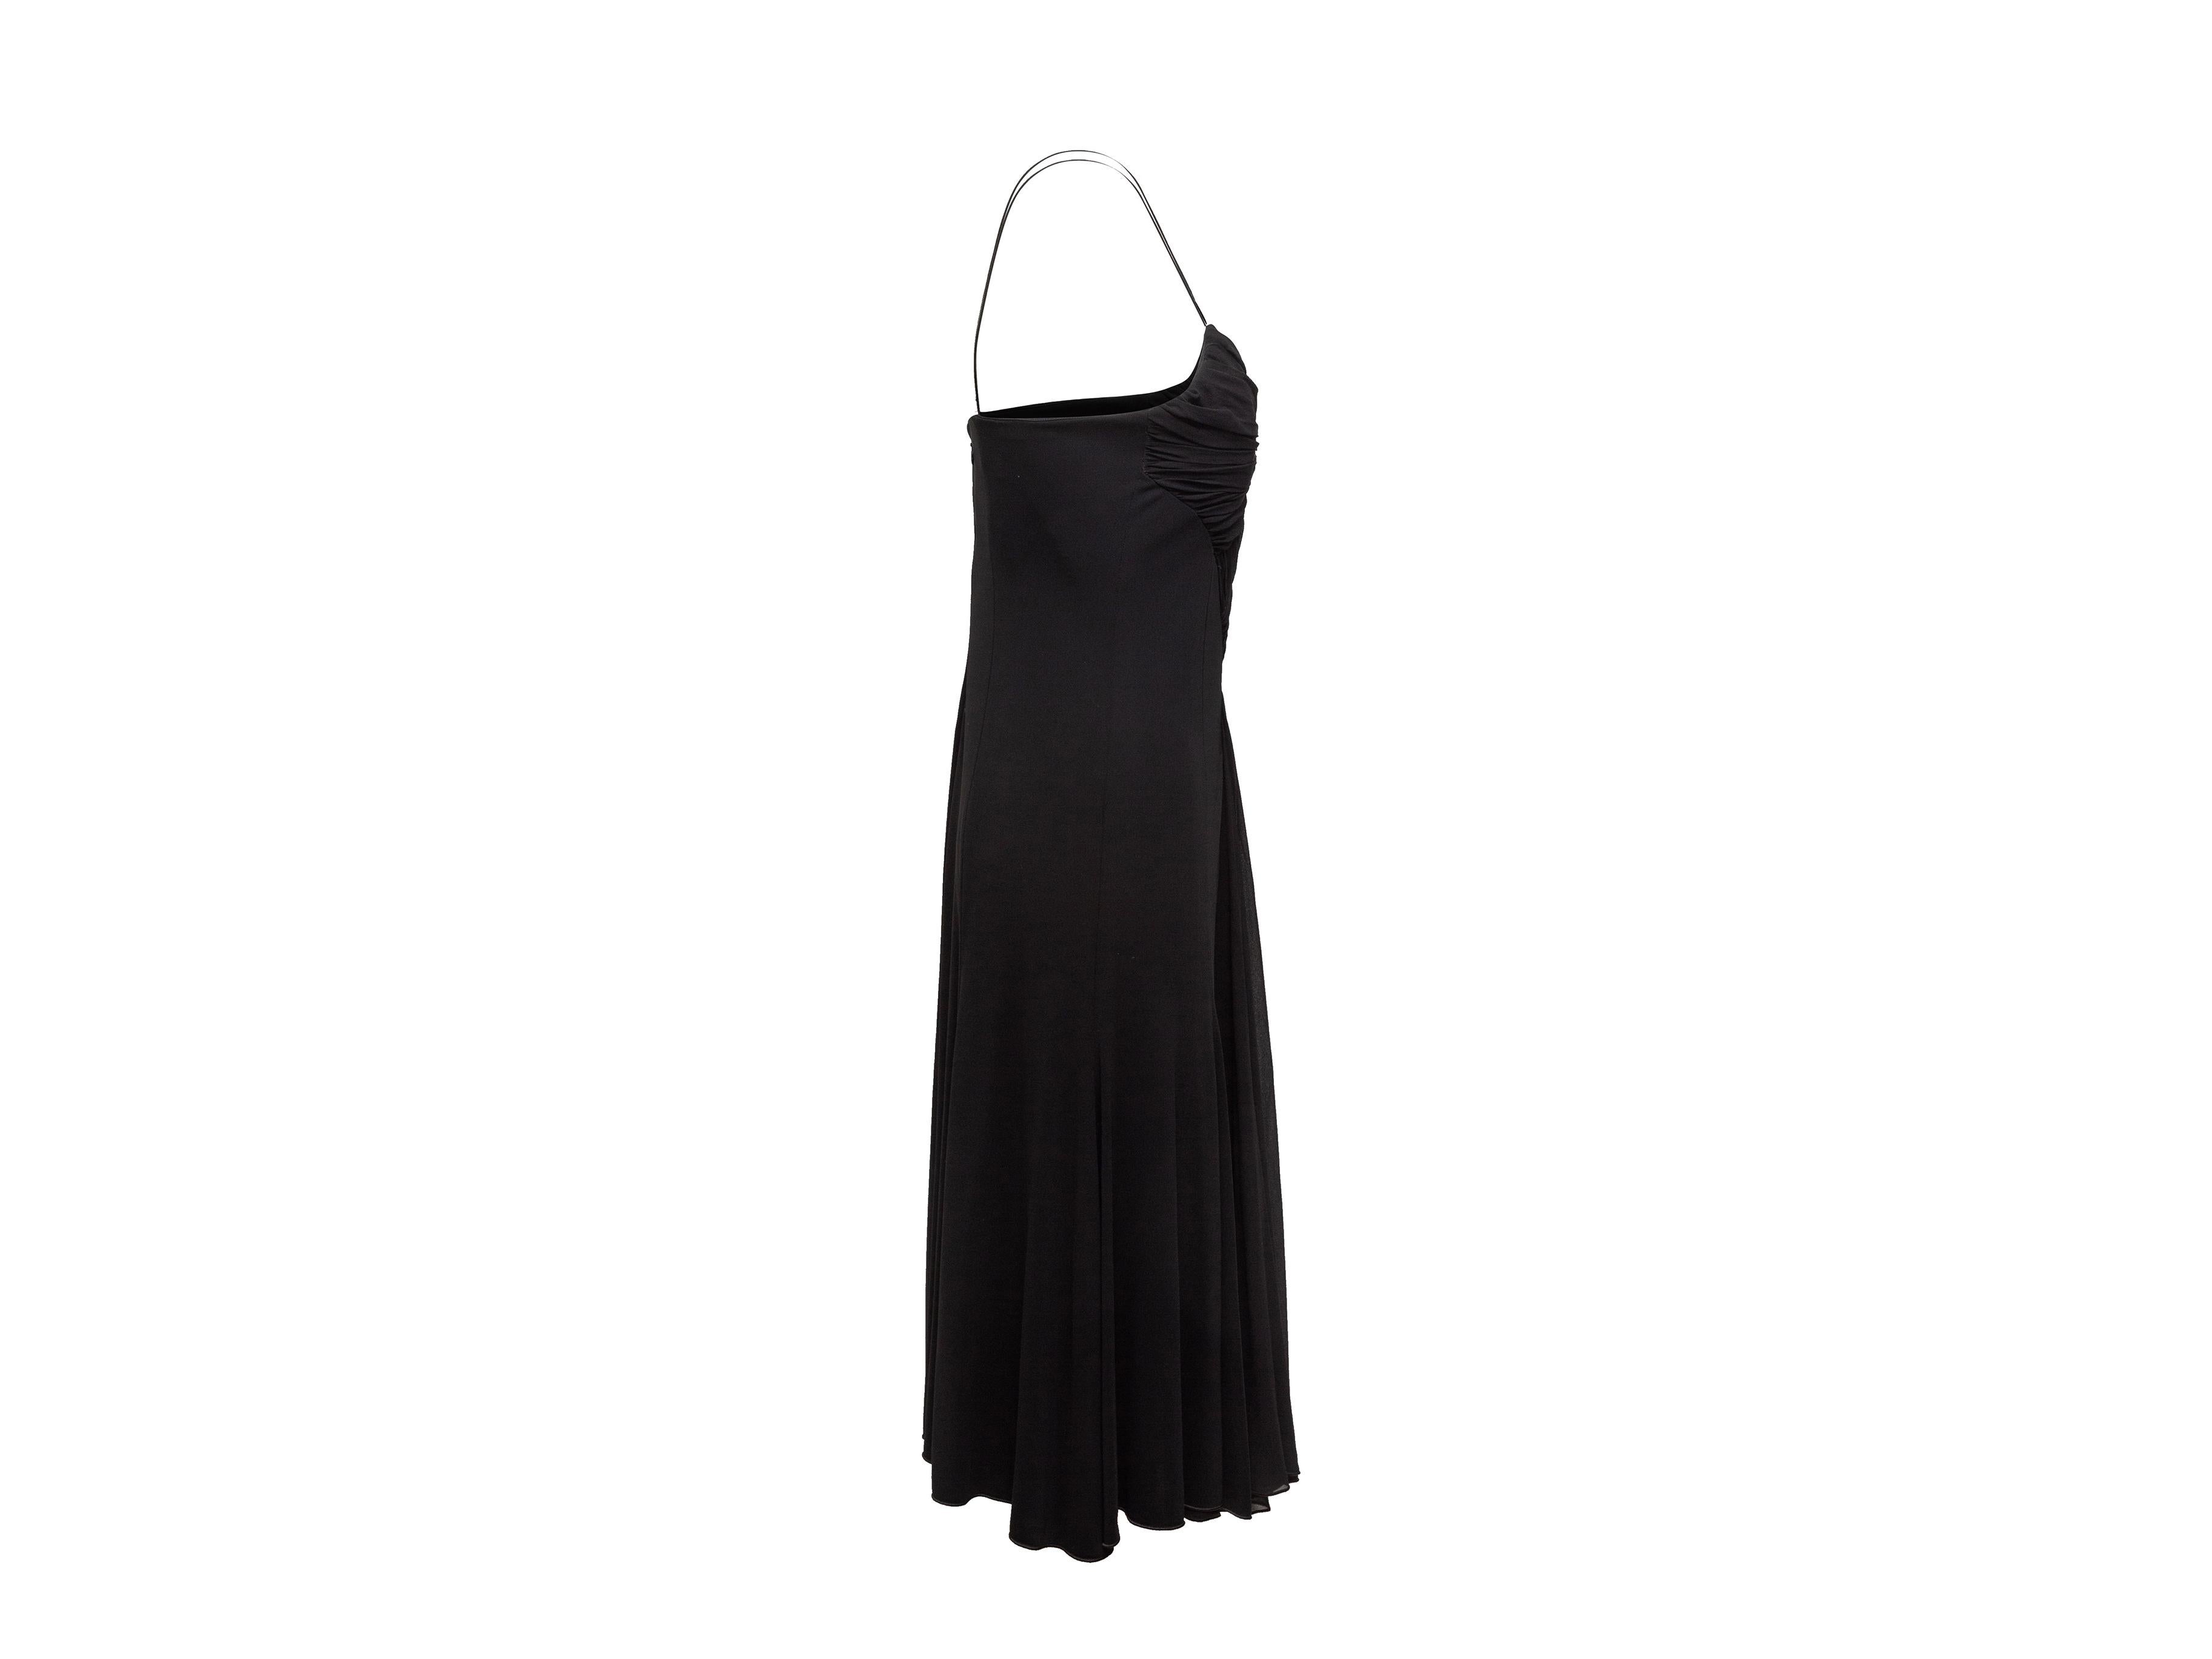 Product details: Black sleeveless evening gown by Armani Collezioni. Narrow straps. Sweetheart neckline. Draping at skirt. 32